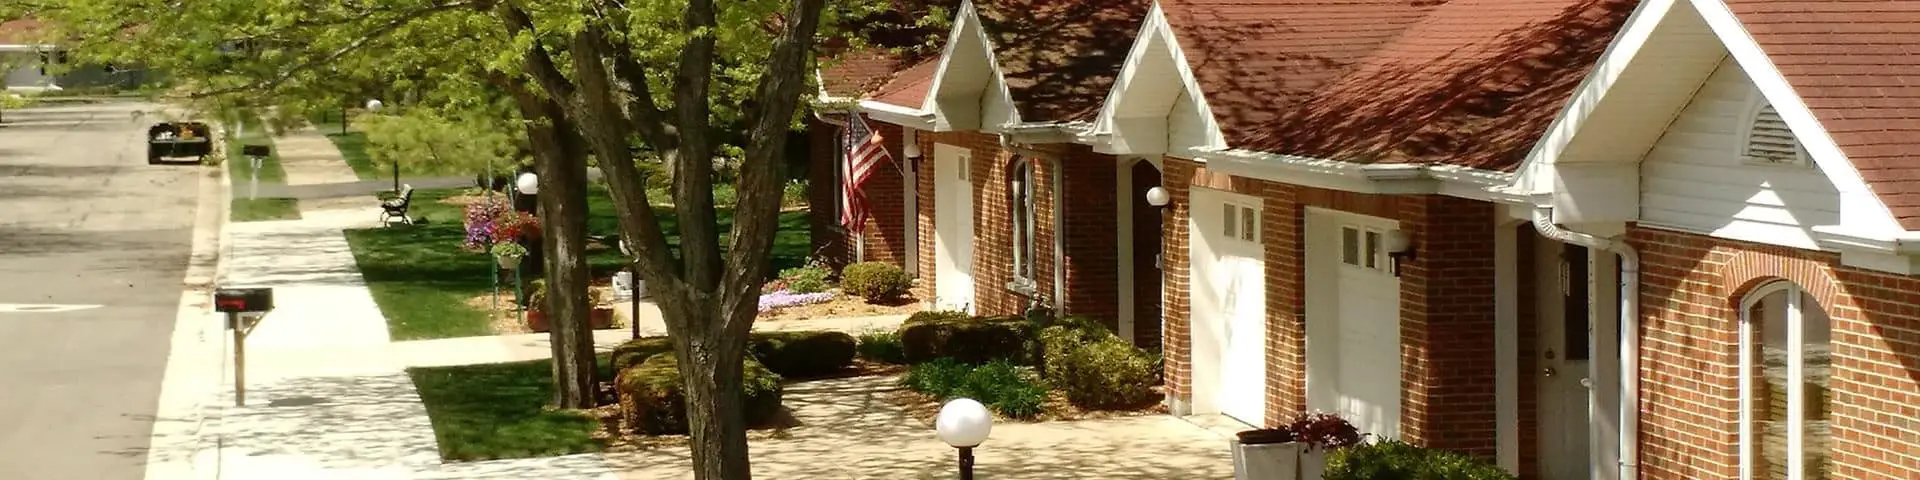 Photo of Park View Home, Assisted Living, Nursing Home, Independent Living, CCRC, Freeport, IL 2